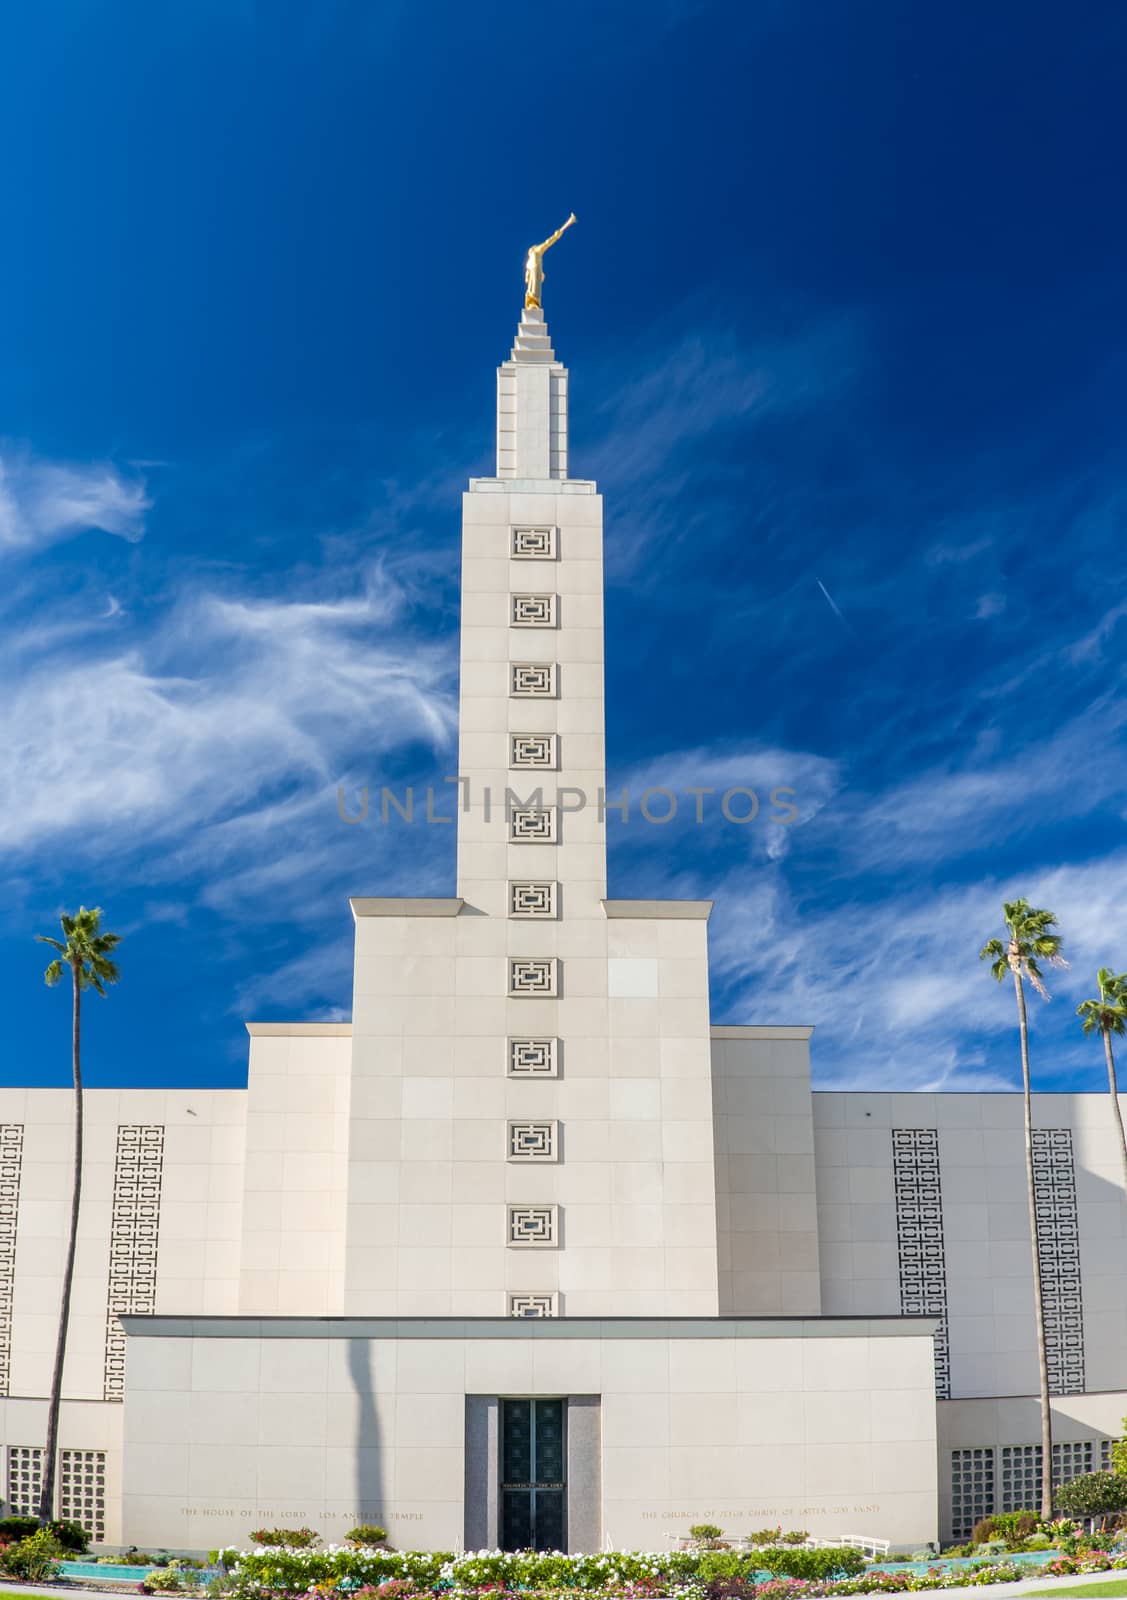 The Los Angeles California Temple by wolterk